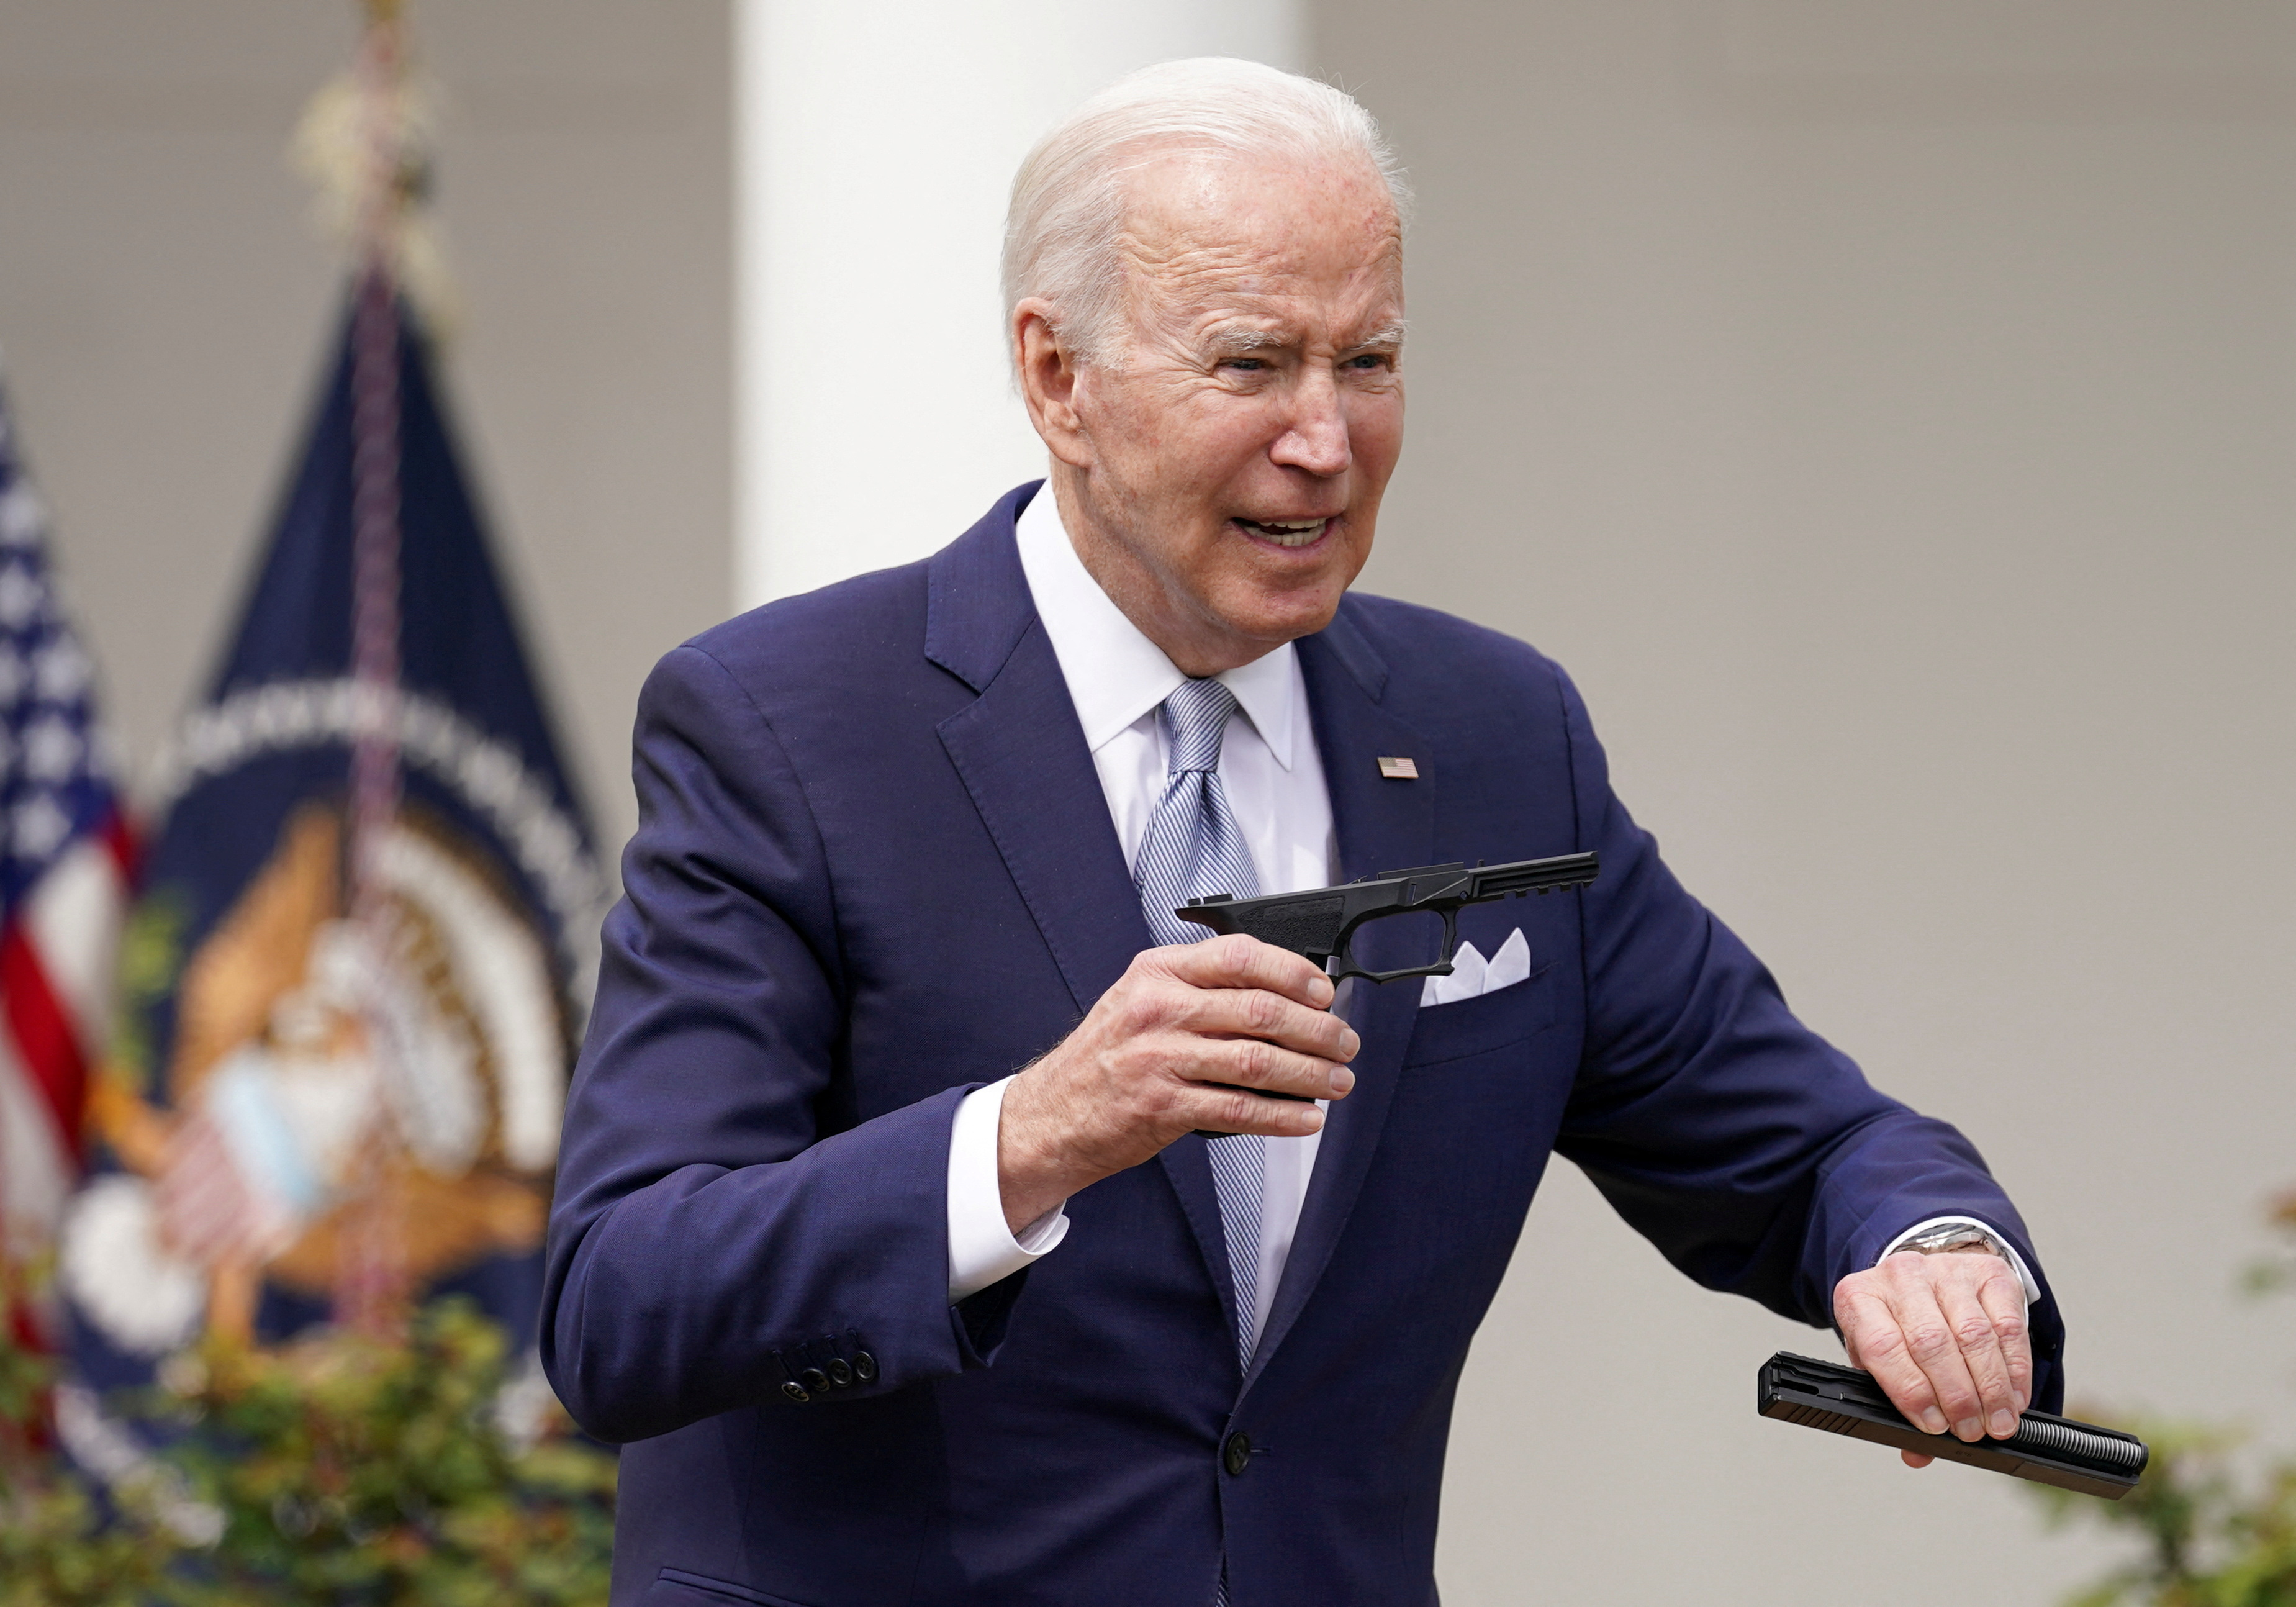 Biden holds ghost gun crime event at the White House in Washington